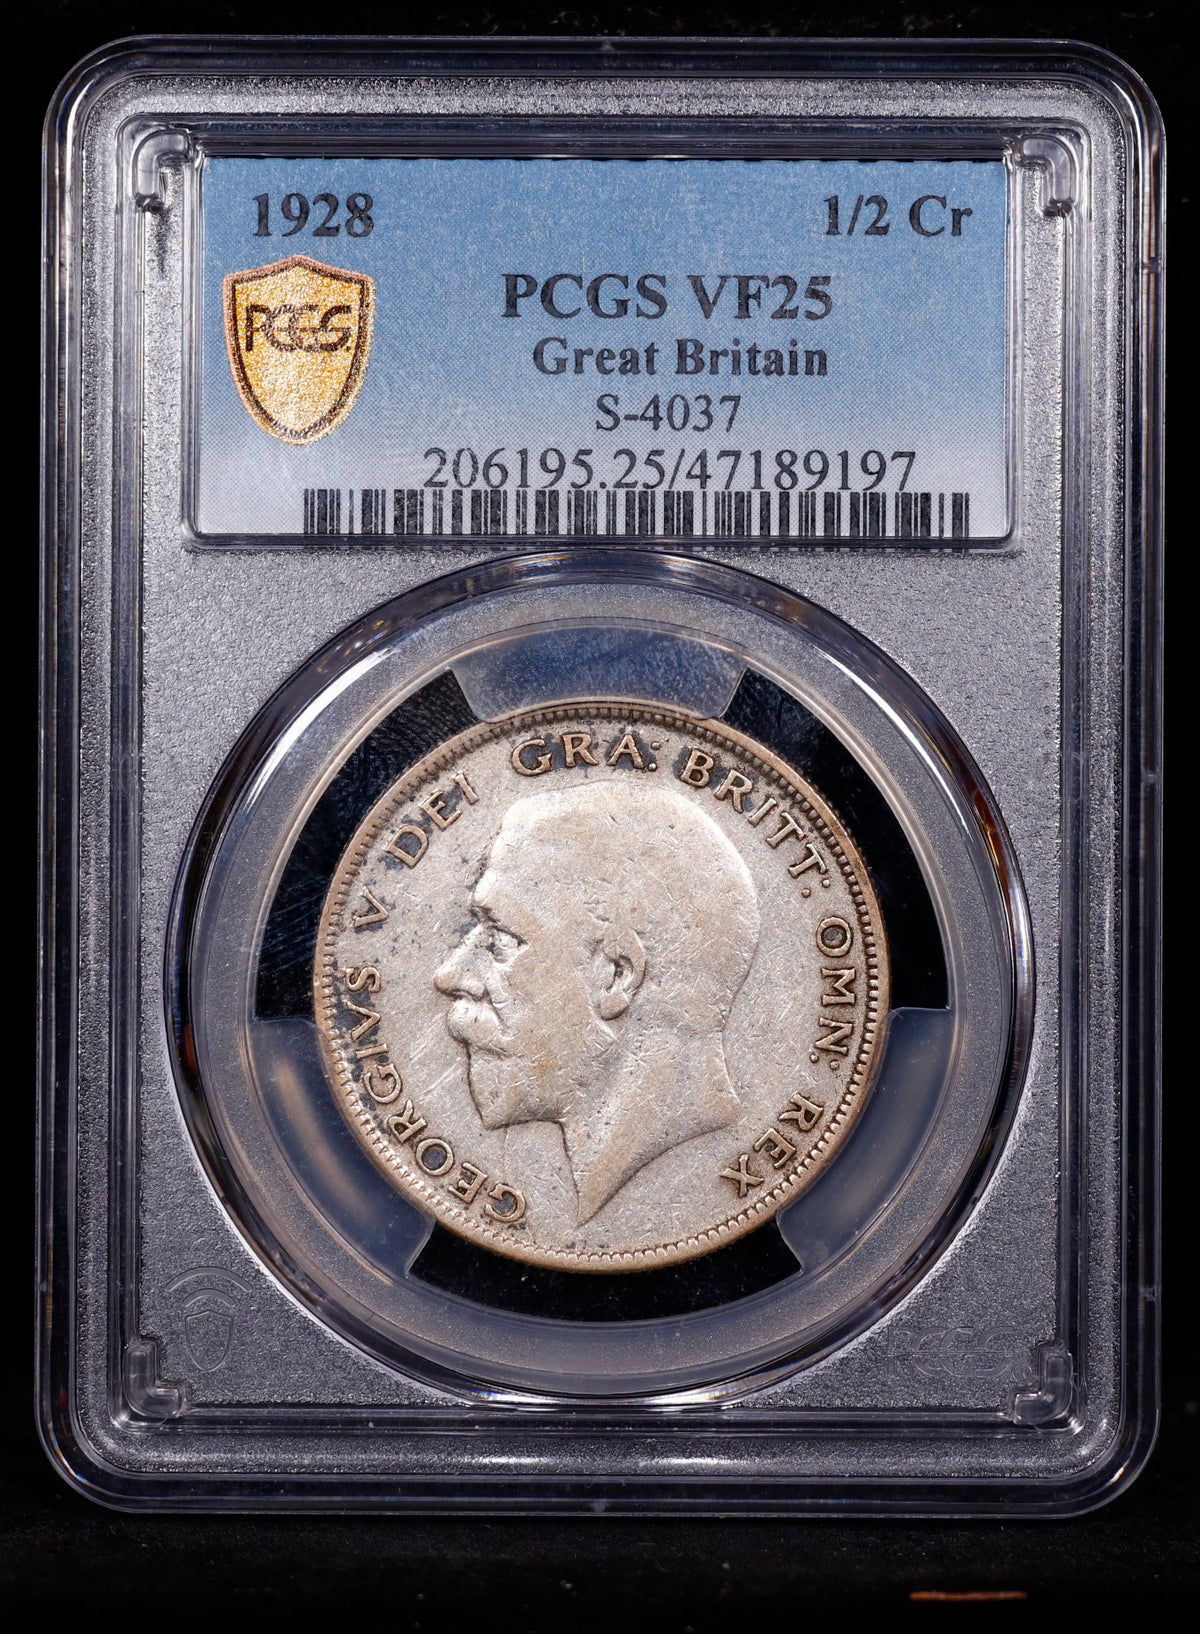 1928 Great Britain 1/2 Crown PCGS VF25